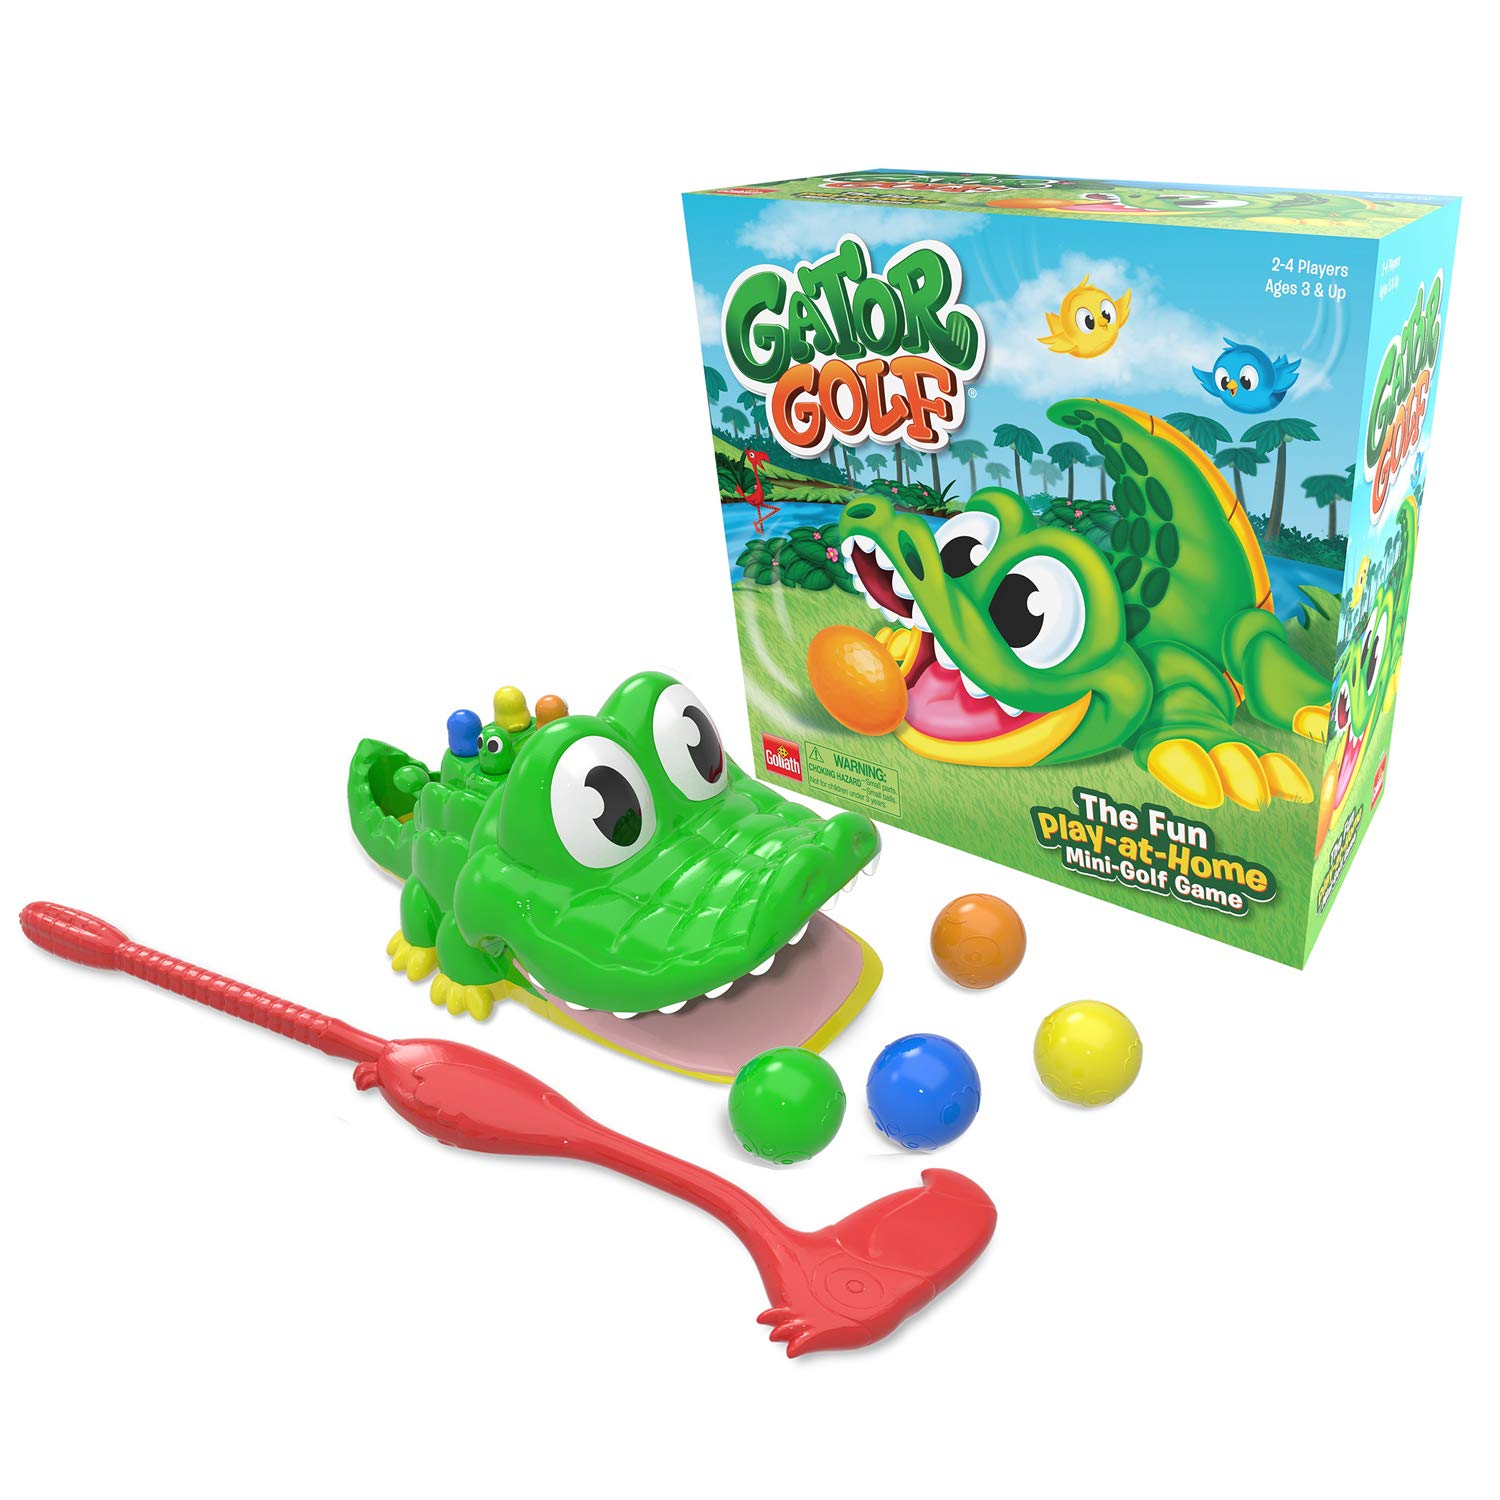 Gator Golf - Putt The Ball into The Gator's Mouth to Score Game by Goliath